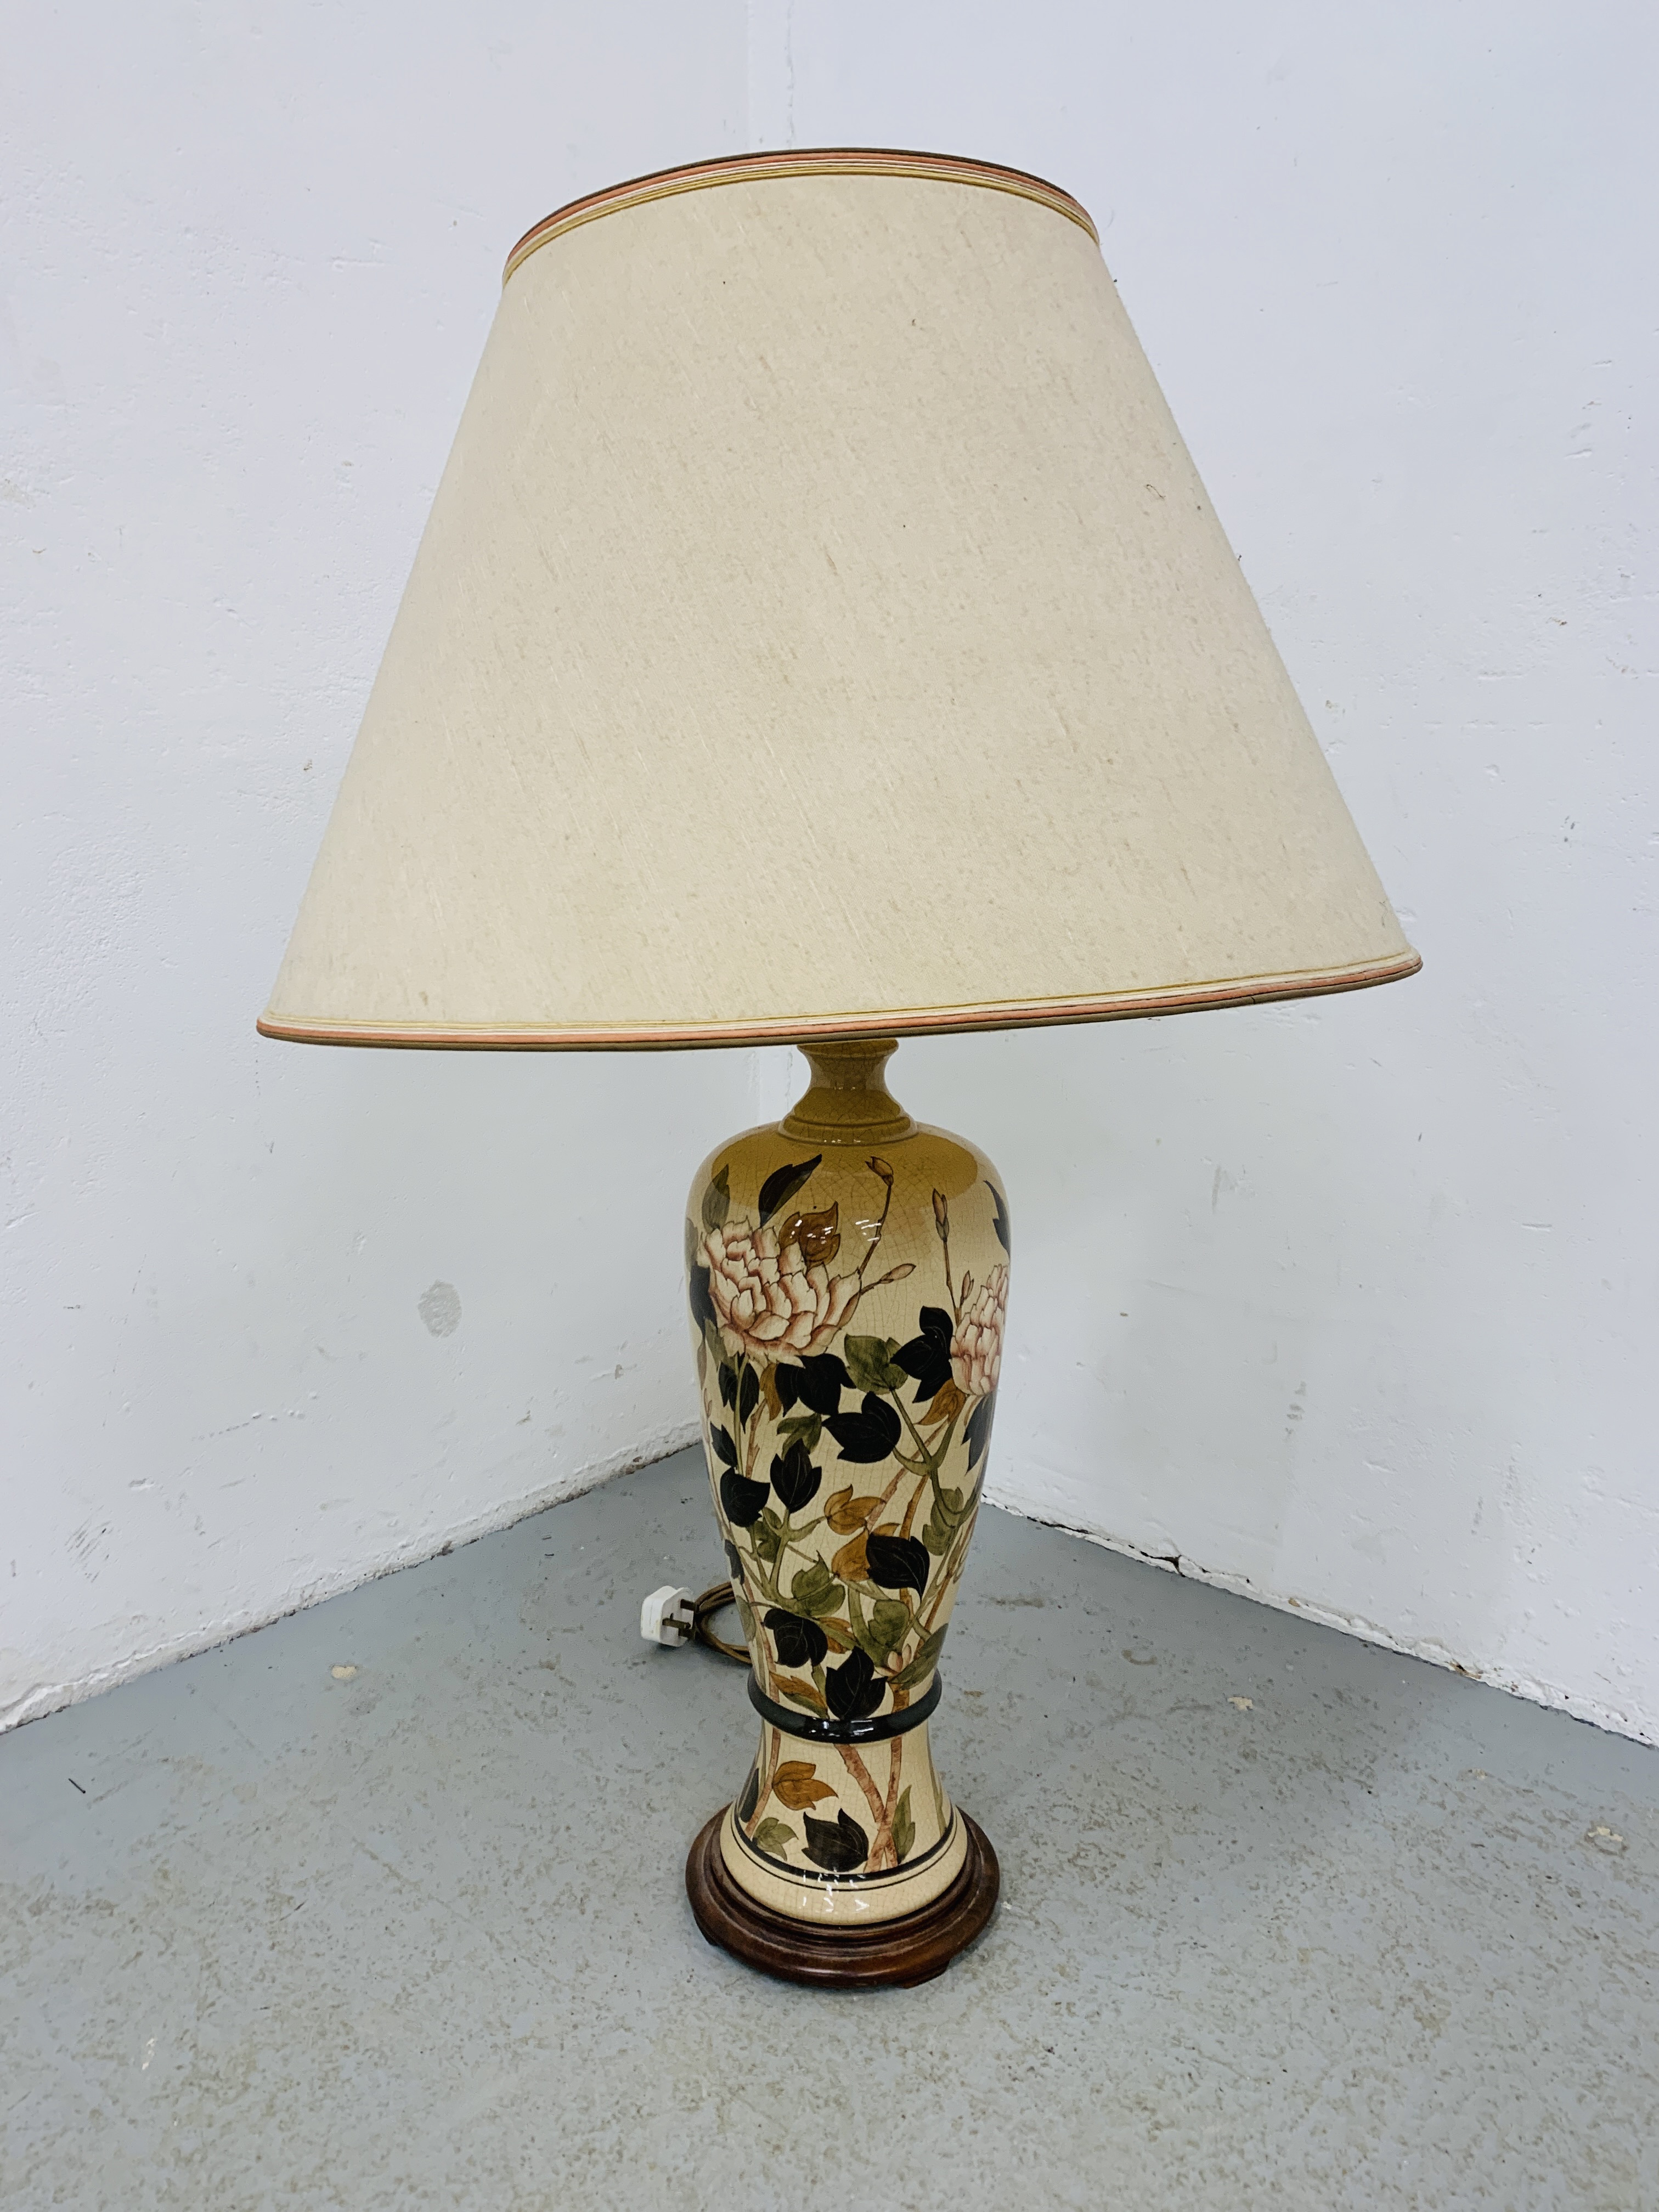 A LARGE FLORAL DECORATED POTTERY TABLE LAMP WITH SHADE - SOLD AS SEEN